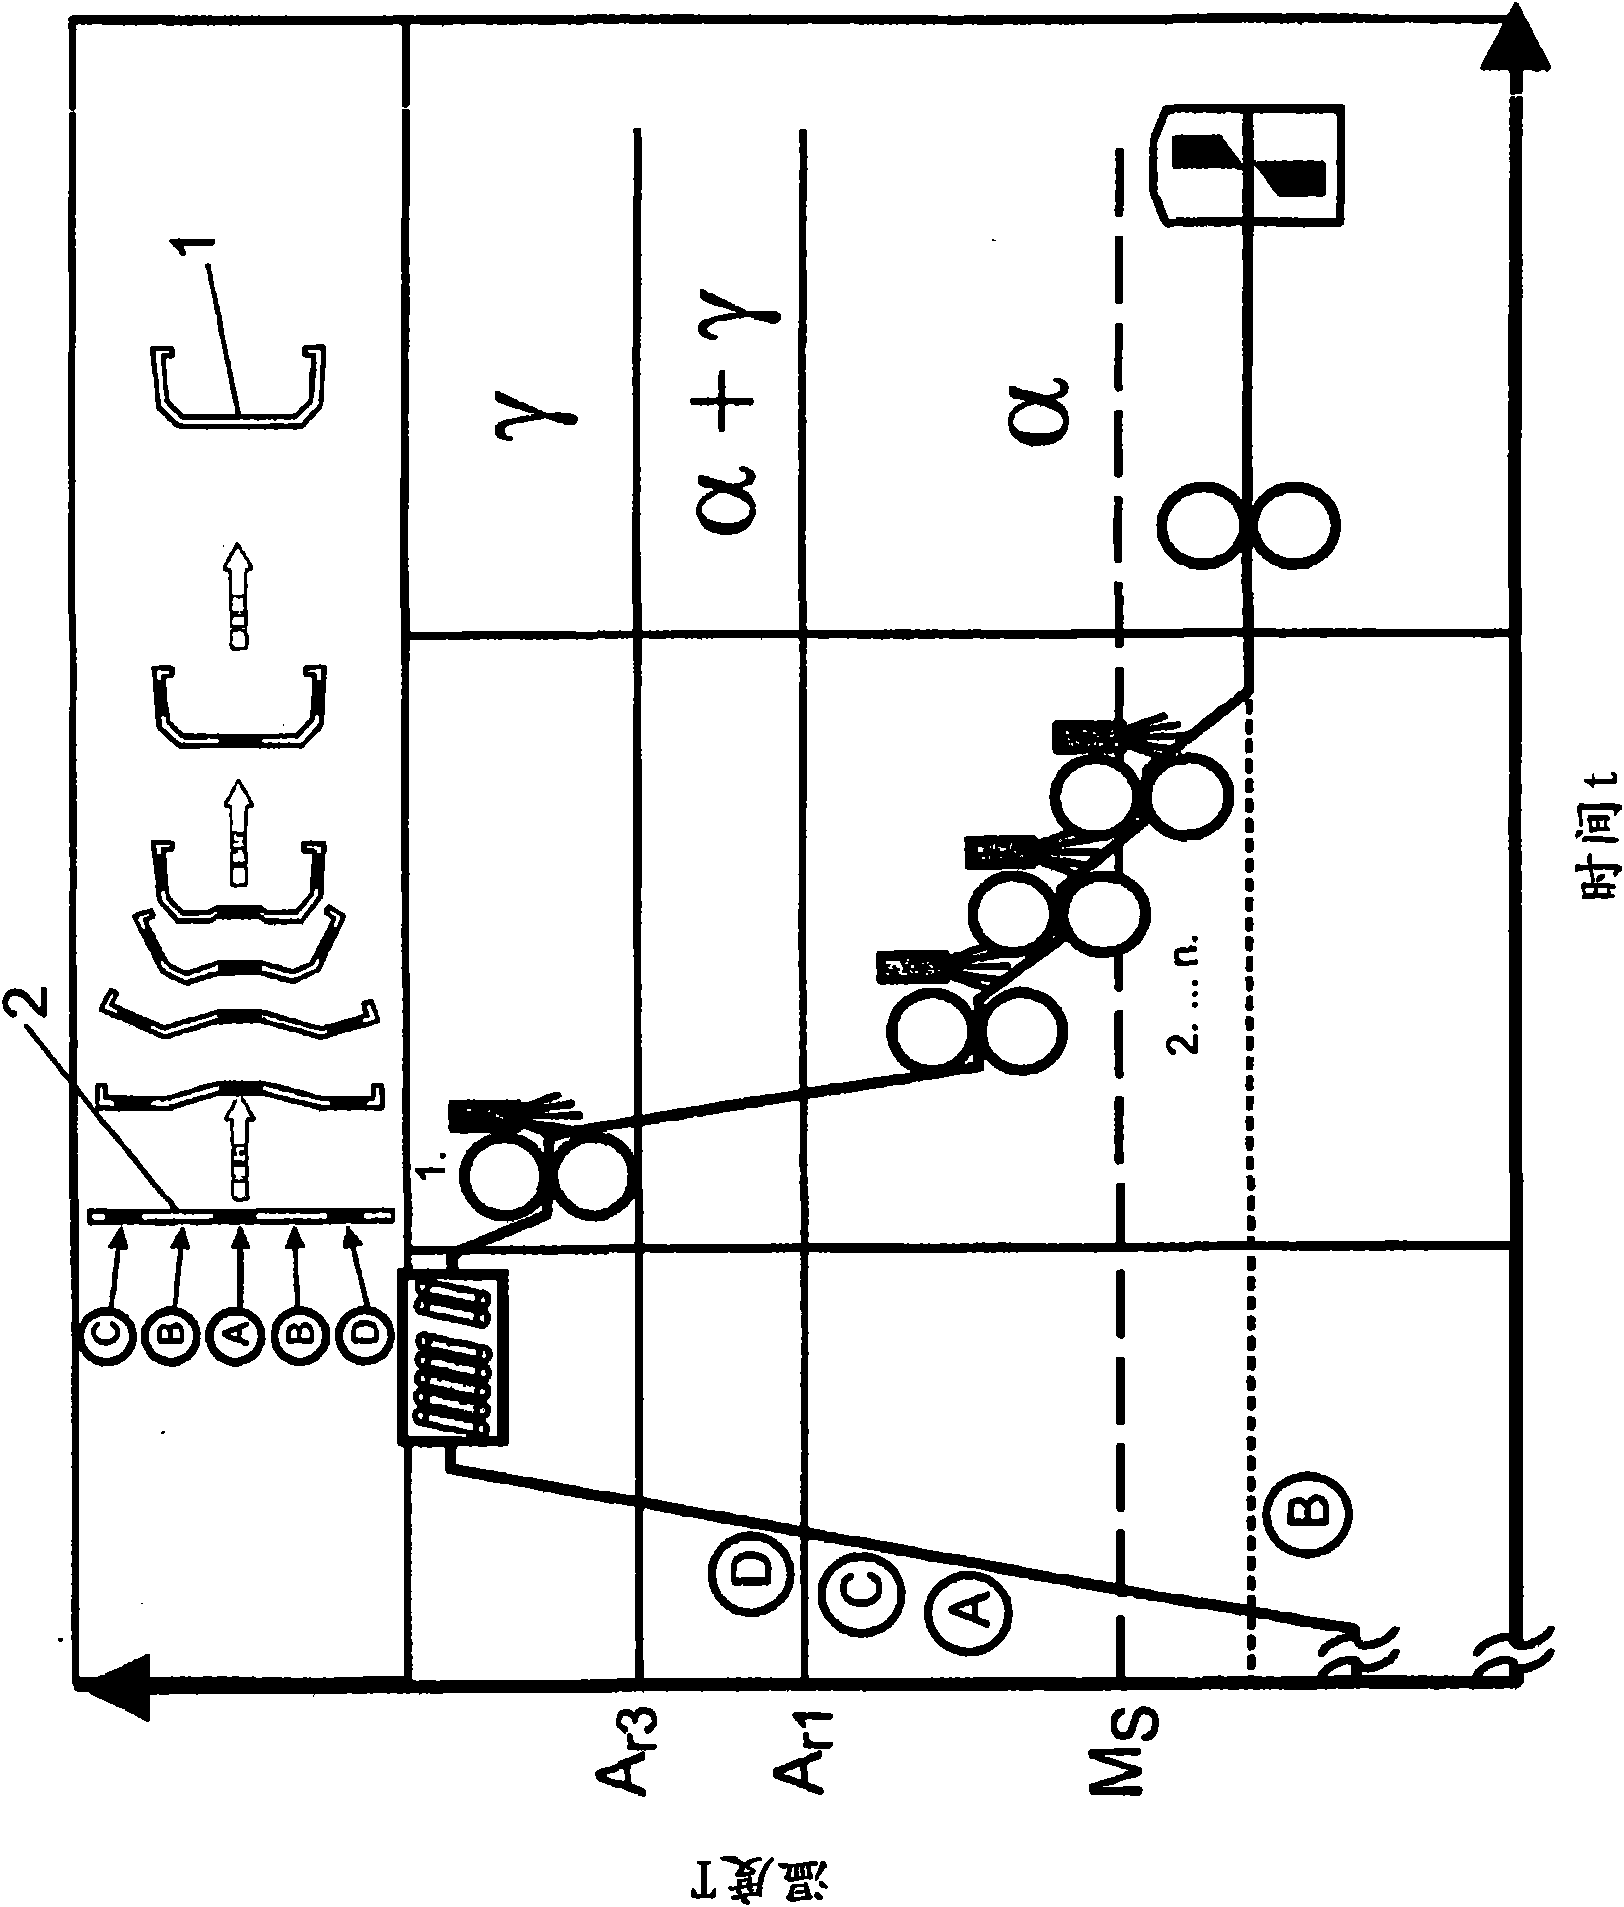 Process for producing a locally hardened profile component, locally hardened profile component and use of a locally hardened profile component